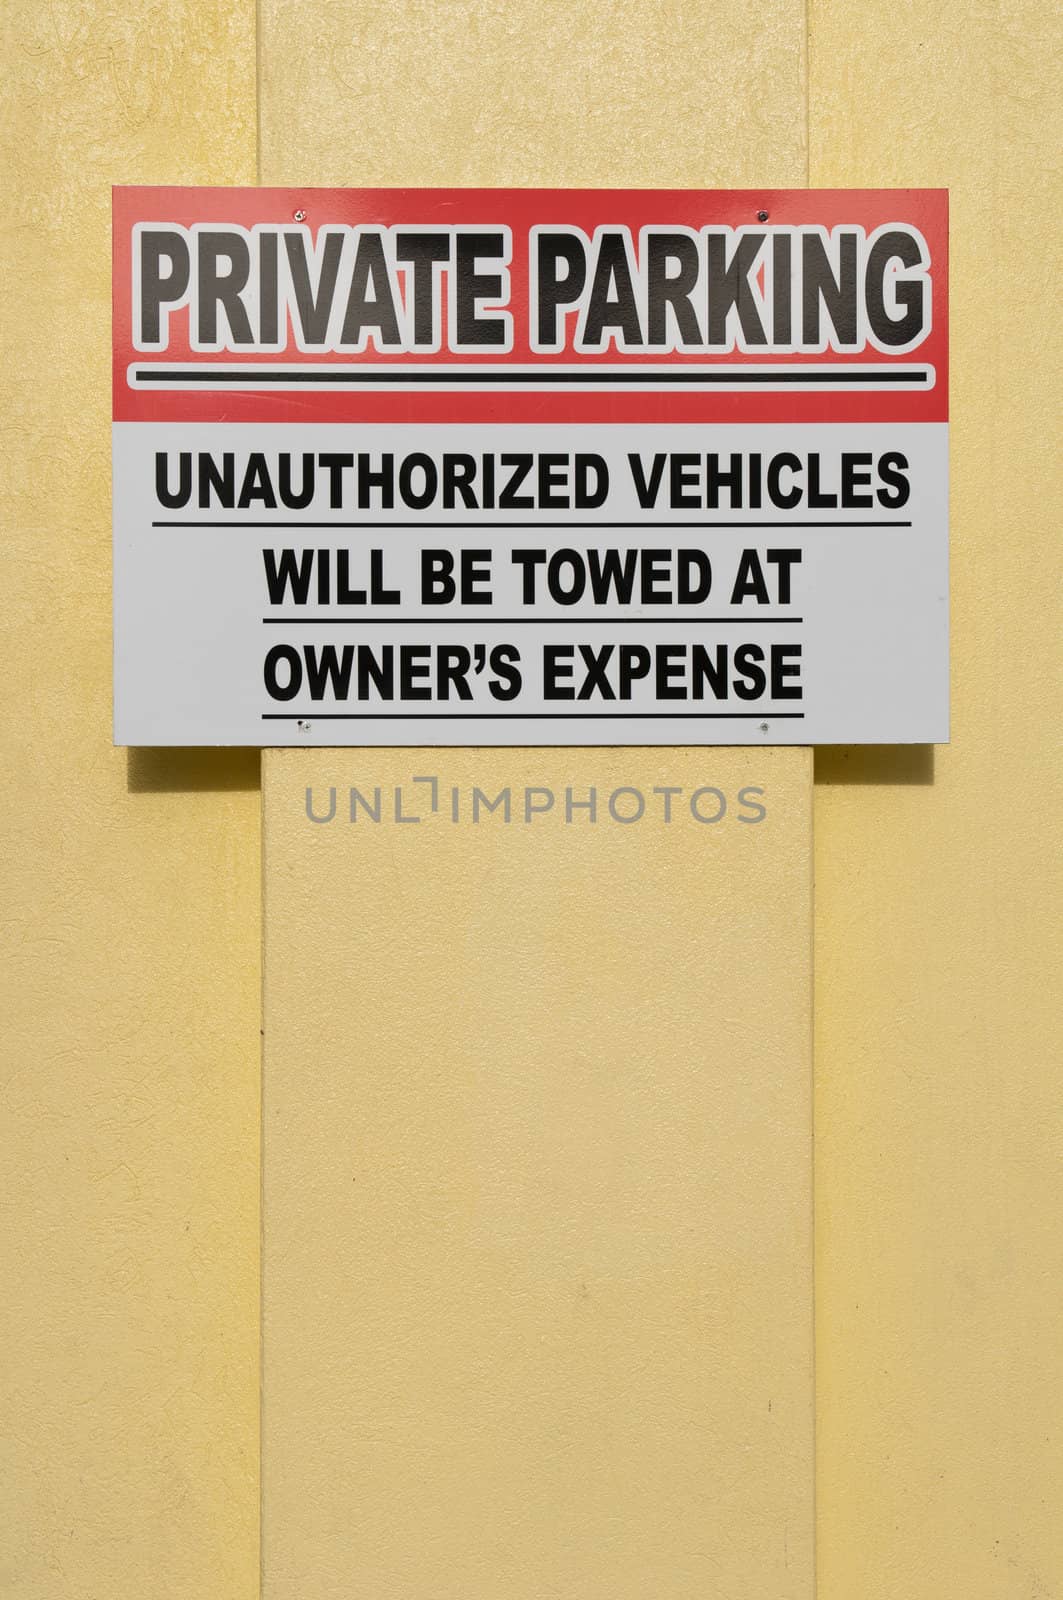 Private parking sign by luissantos84